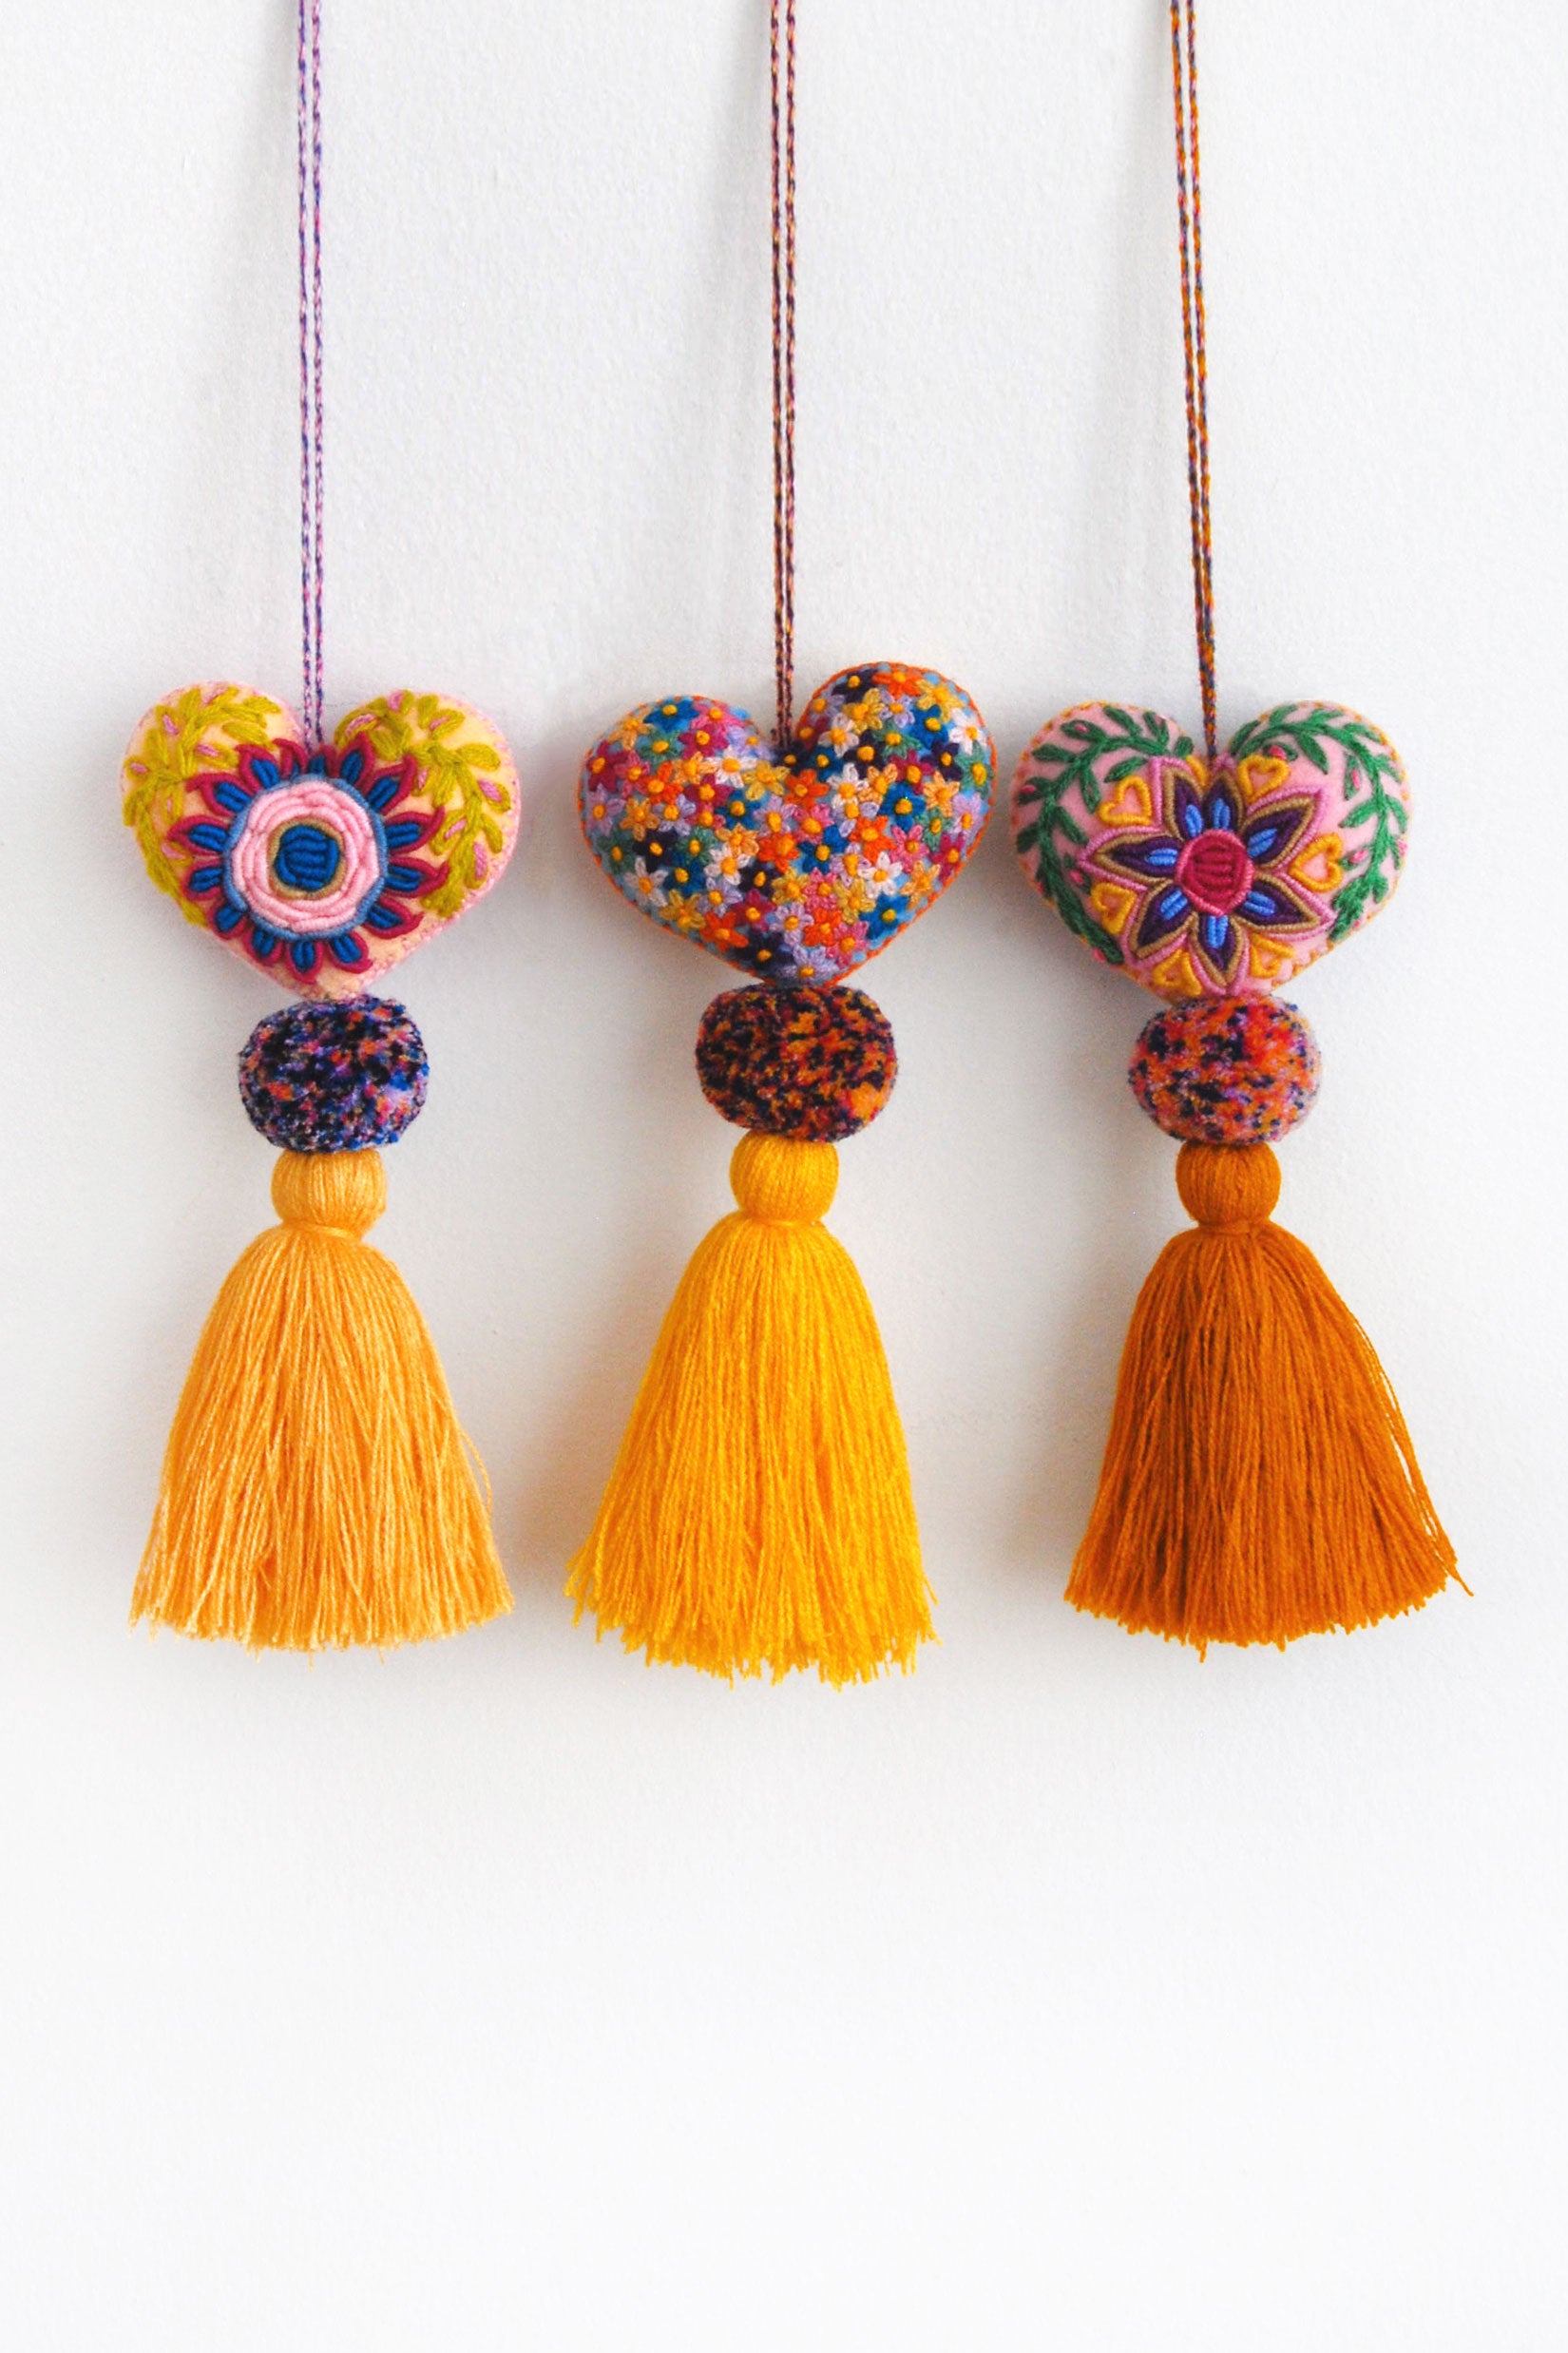 Three colorful plush felt hearts adorned with flower embroidery attached by multicolor speckled pom poms to tassels in varying shades of gold. Each heart is hanging from a string attached to the top of it.